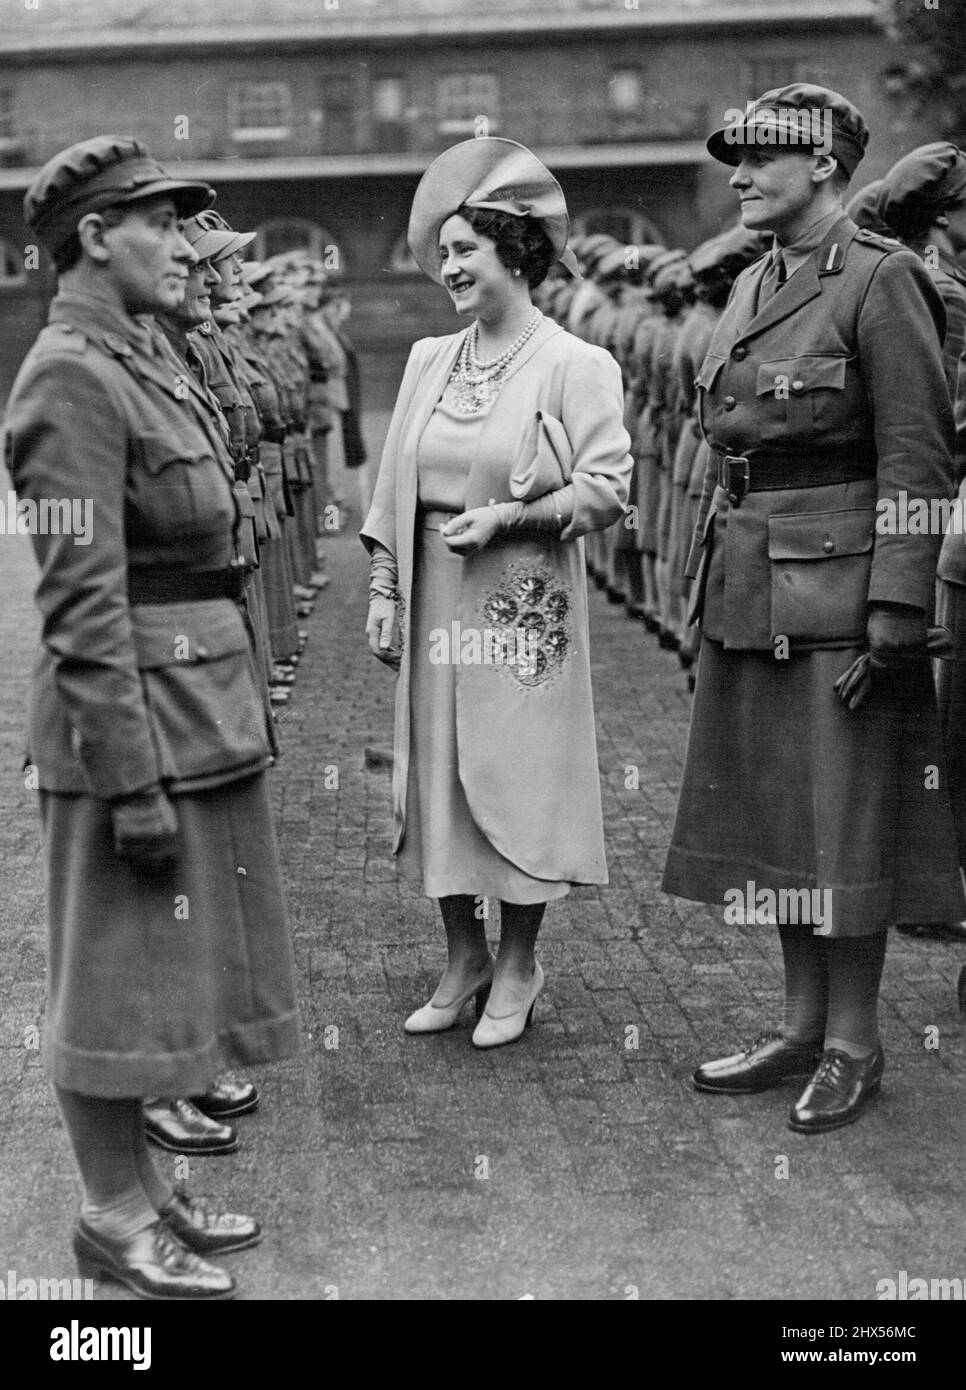 Queen Inspects Women's Legion -- H.M. The Queen inspecting the Women's Legion at the Royal News Buckingham Palace. One a week uniformed women drill at the Royal Maws, Bukingham palace London, and last night they were inspected by H.M. The Queen. They are members of the Women's Legion, the famous corps founded in 1914. The Women's Legion is Voluntary crops which has been included in the Army list since it began in 1914. October 24, 1940. (Photo by London News Agency Photos). Stock Photo